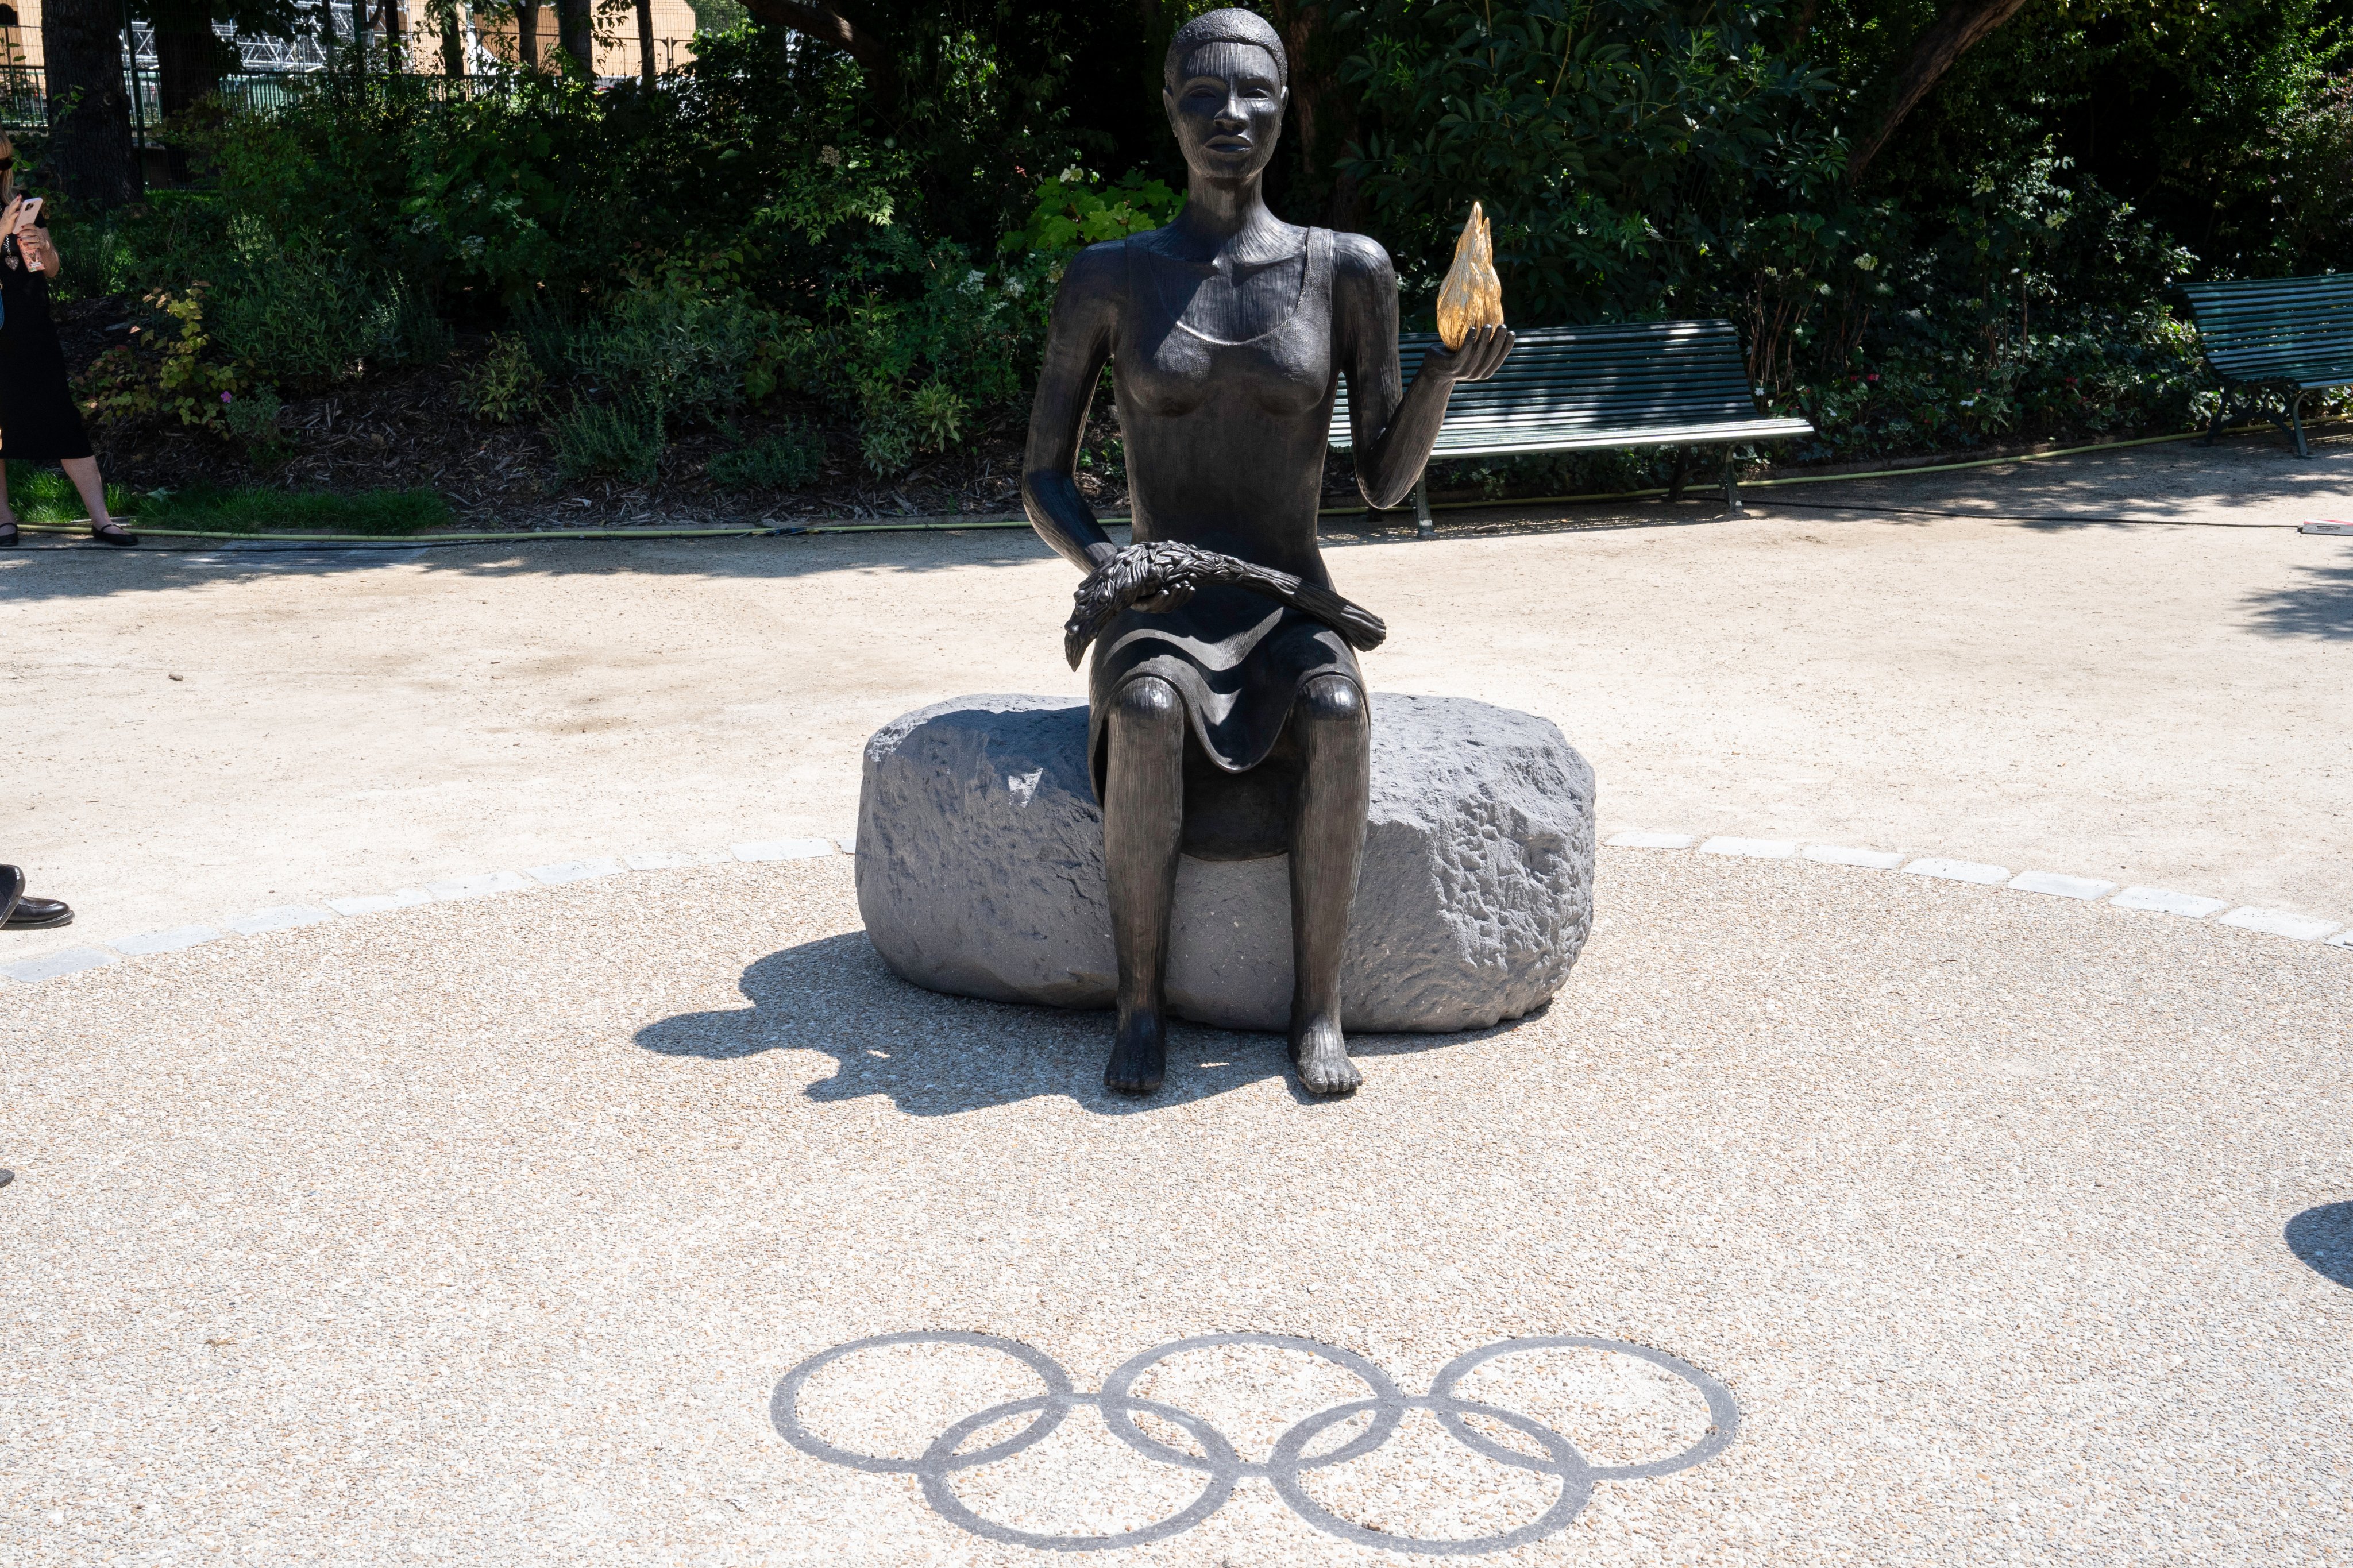 A sculpture is unveiled for the Olympic Day commemorations in Paris, France, June 23, 2024. /IOC MEDIA